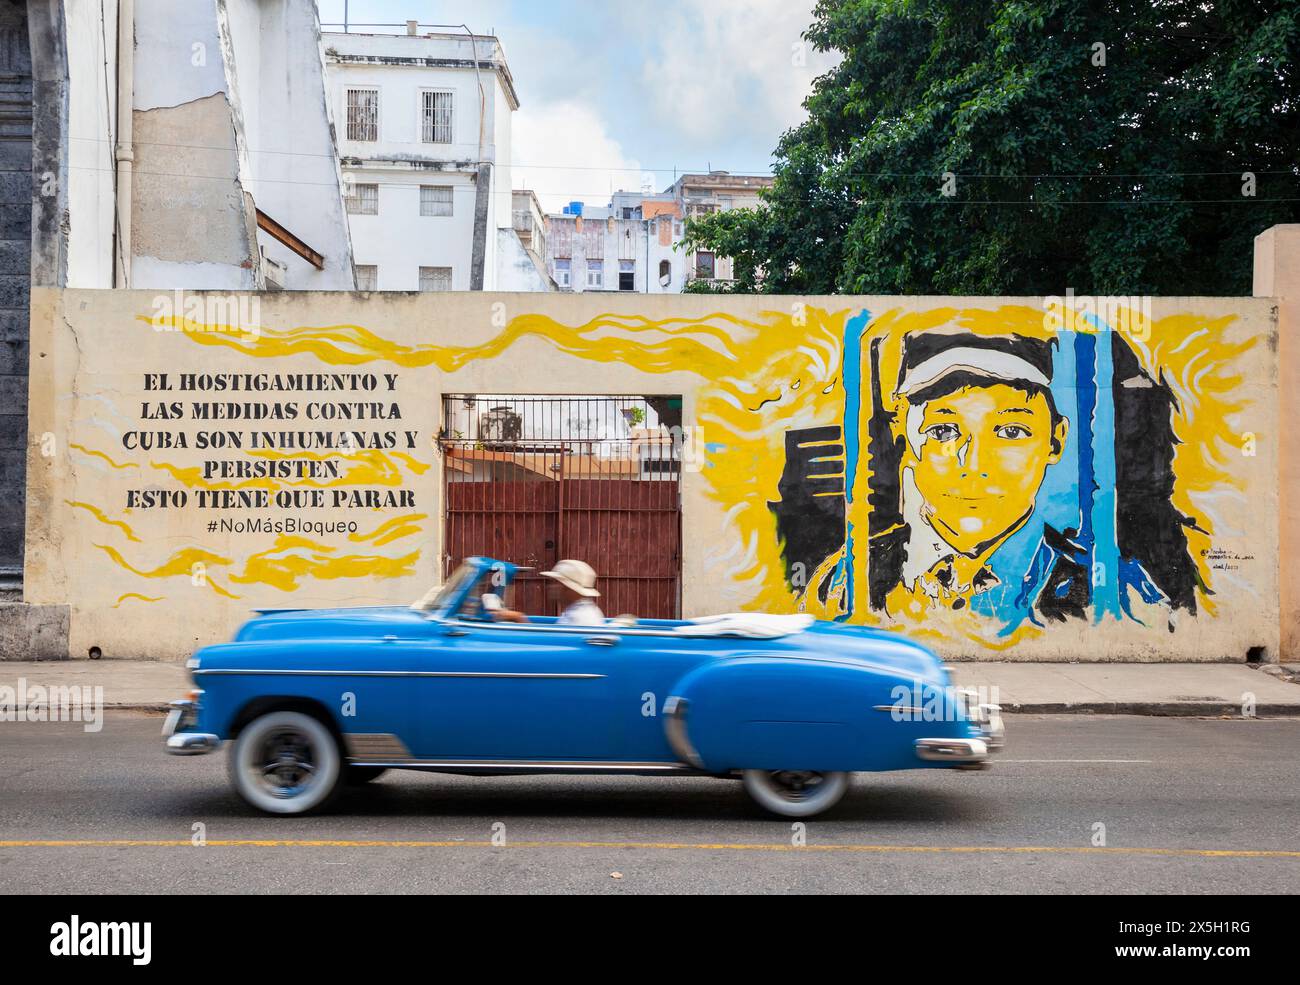 1950s Chevy passes Havana mural. The text reads: 'The harassment and measures against Cuba are inhuman and persist, this has to stop. No more blockade Stock Photo